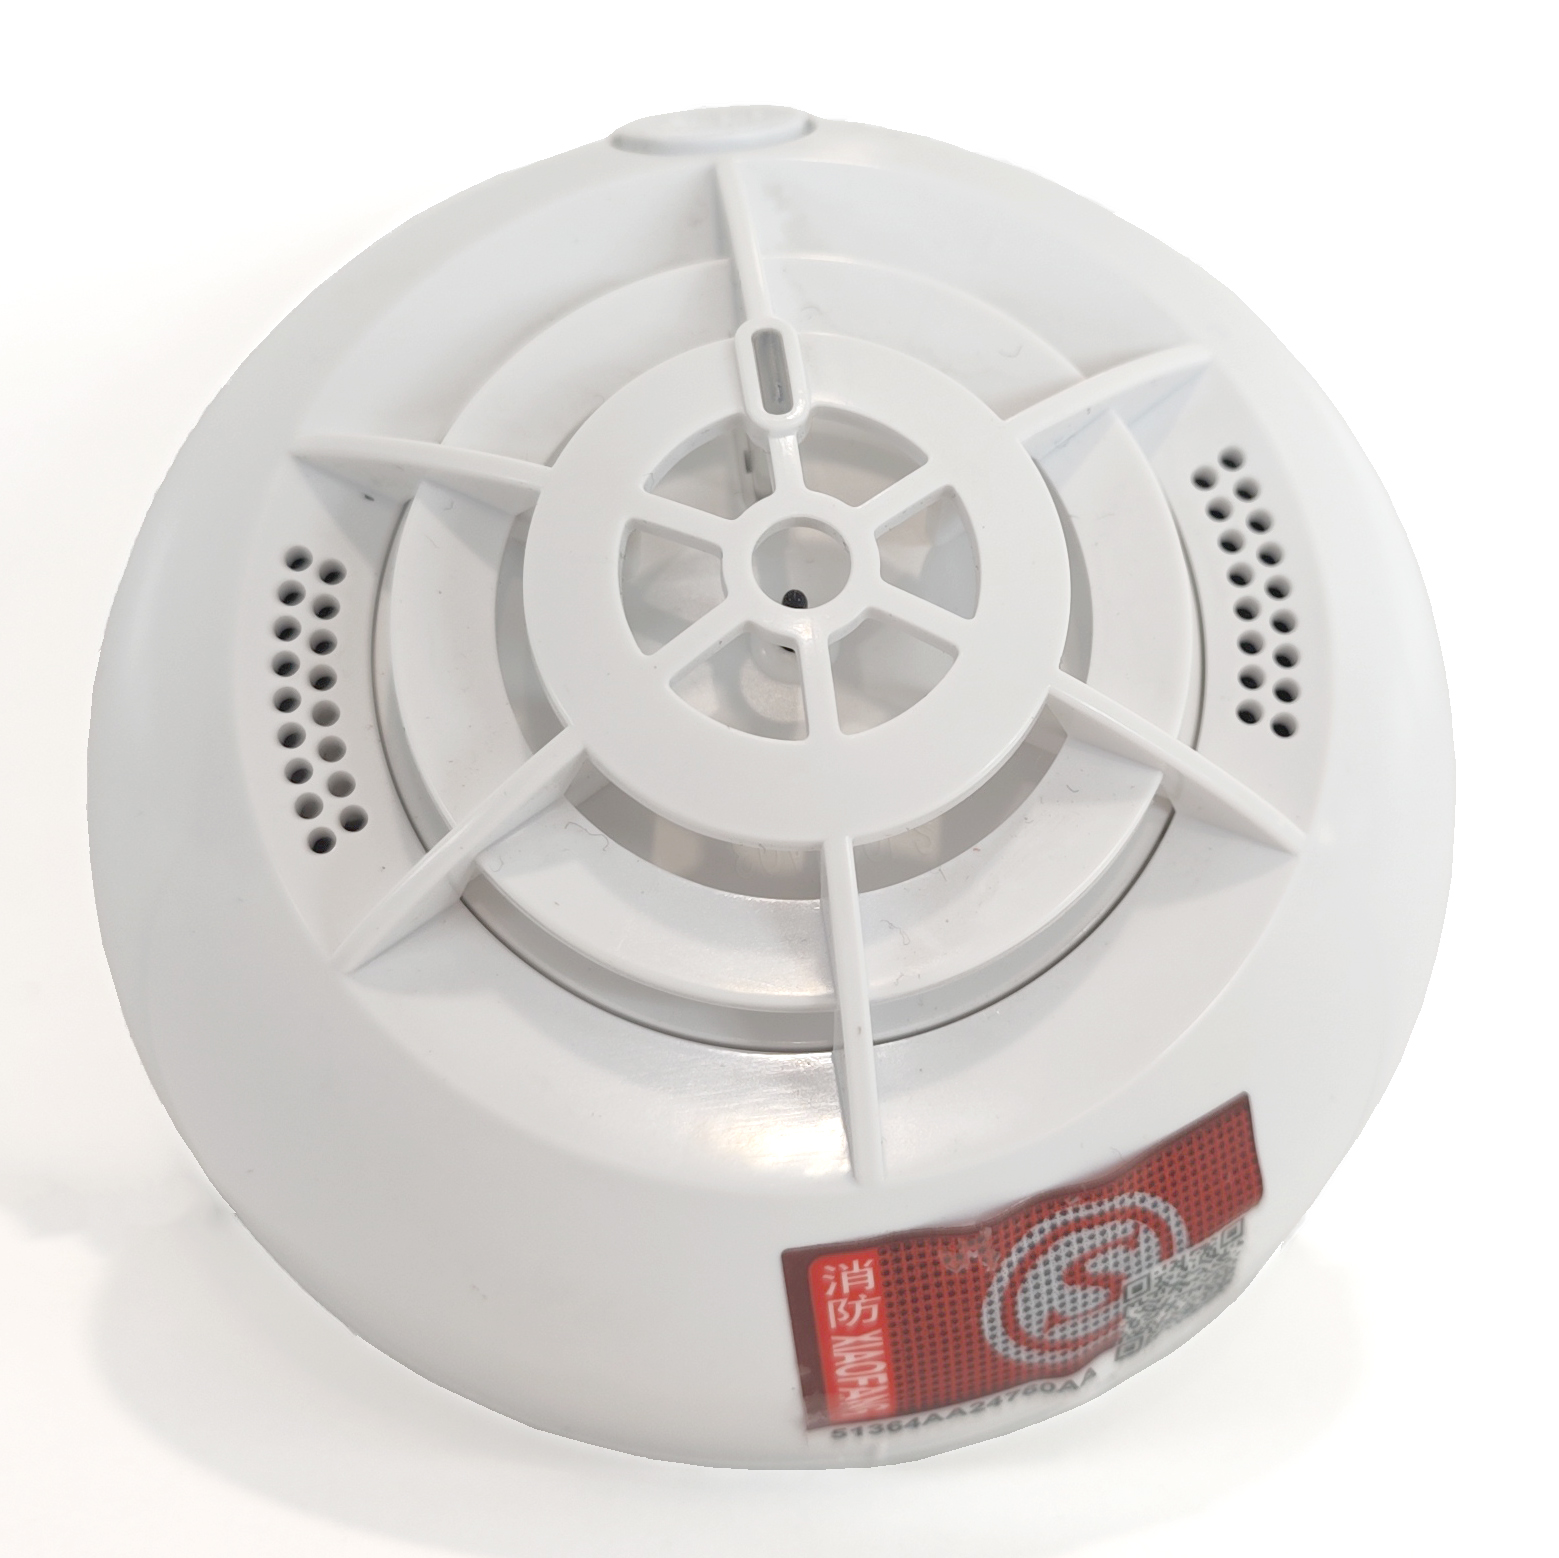 What are the typical applications and locations of conventional fire alarm sounders?